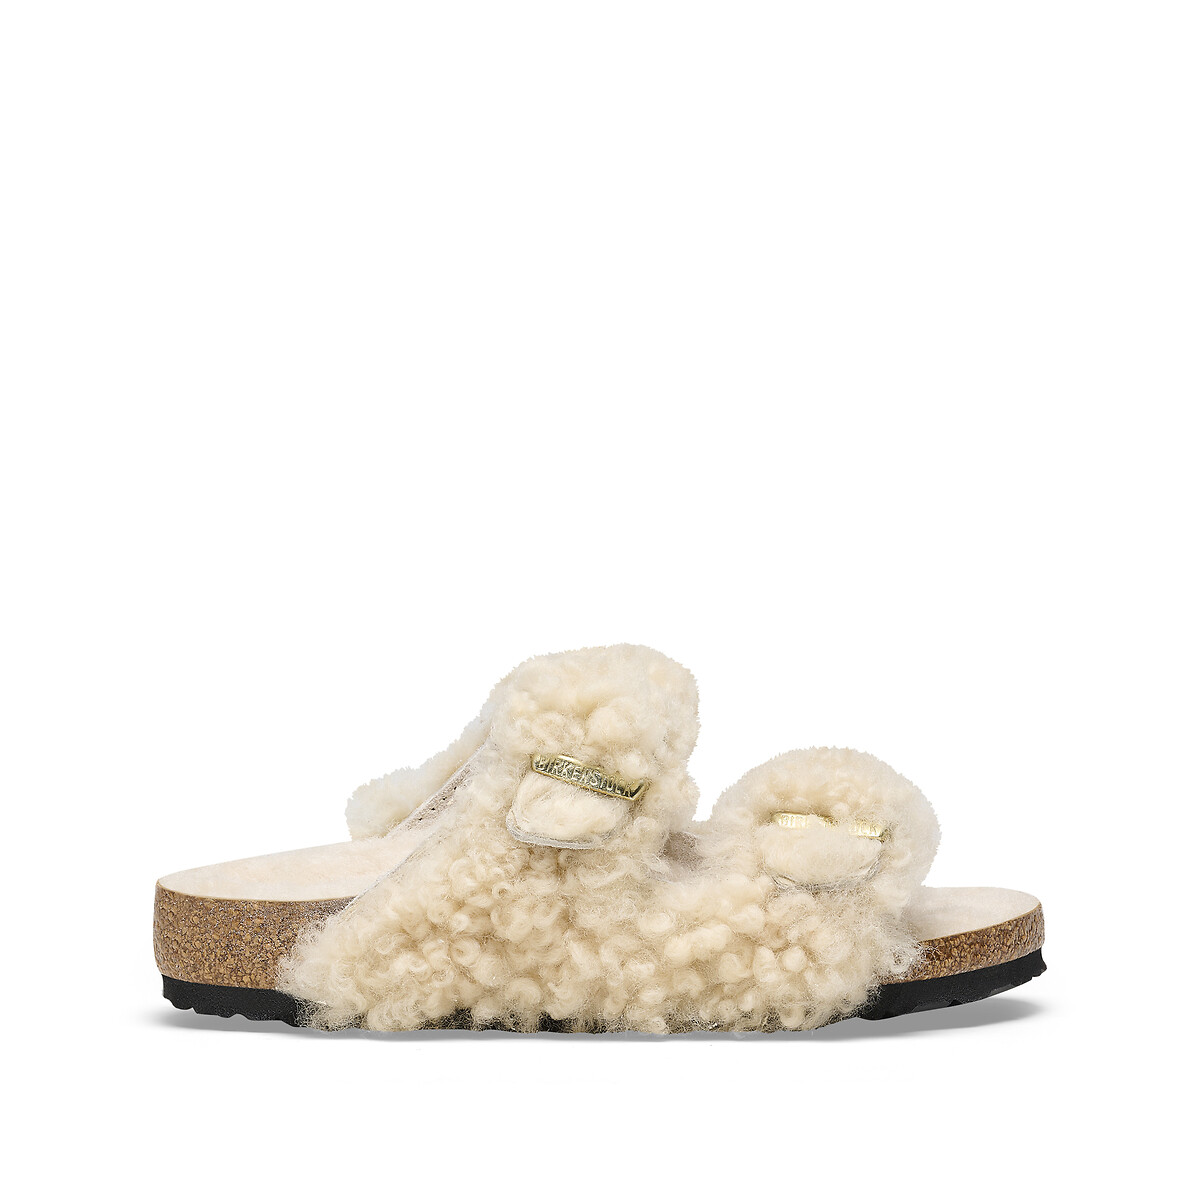 Image of Arizona Teddy Rivet Mules in Wool with Shearling Lining